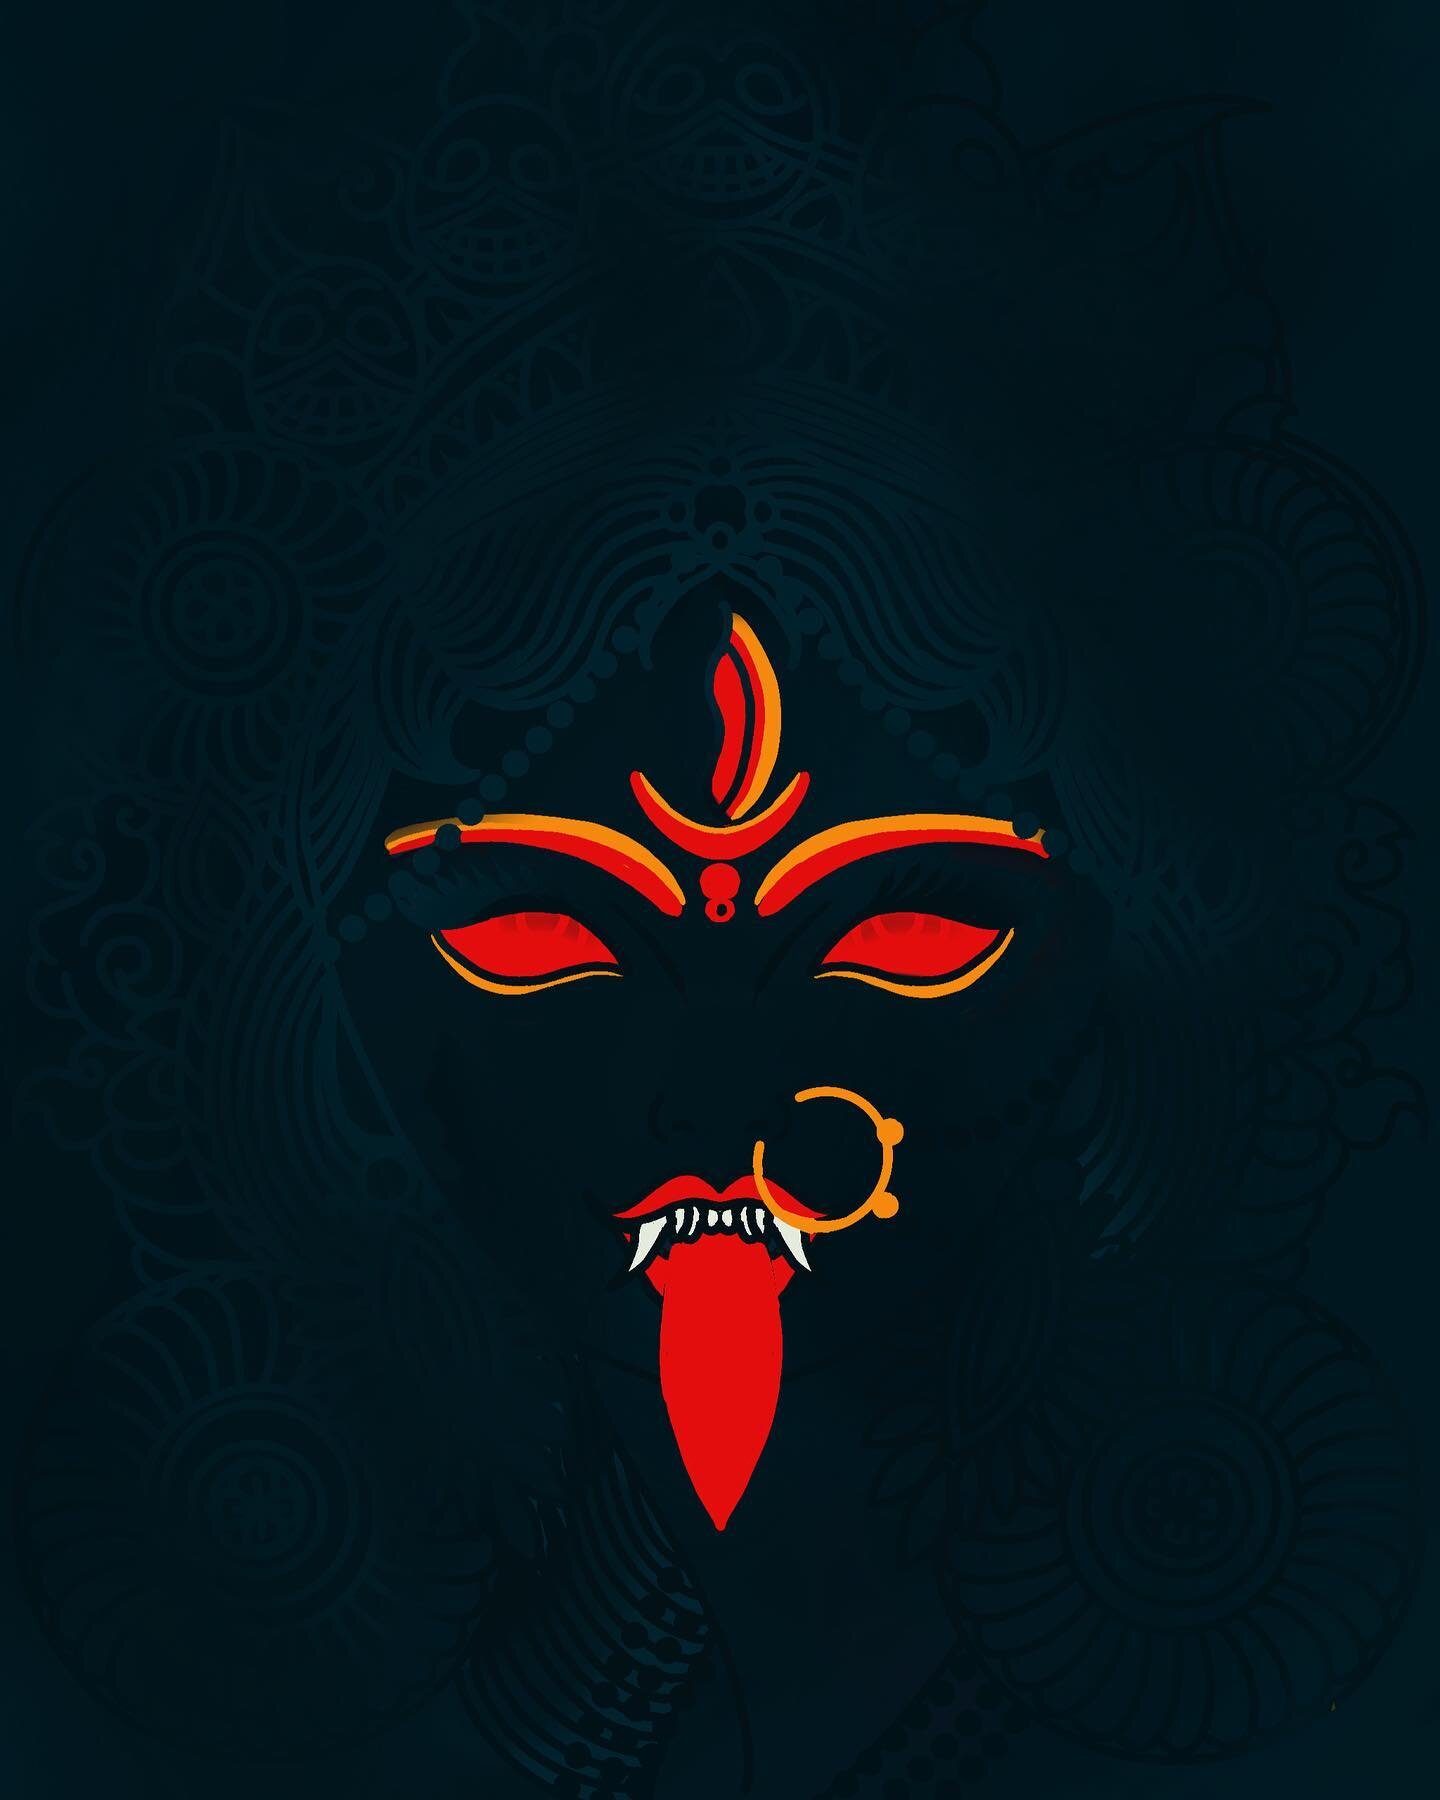 Kali Ma represents the darkness from which everything is born; the force of time, change, destruction and creation. 

A friend once told me &ldquo;I&rsquo;m like a shark. I need to keep moving, changing, growing. Like a shark, If I don&rsquo;t keep m